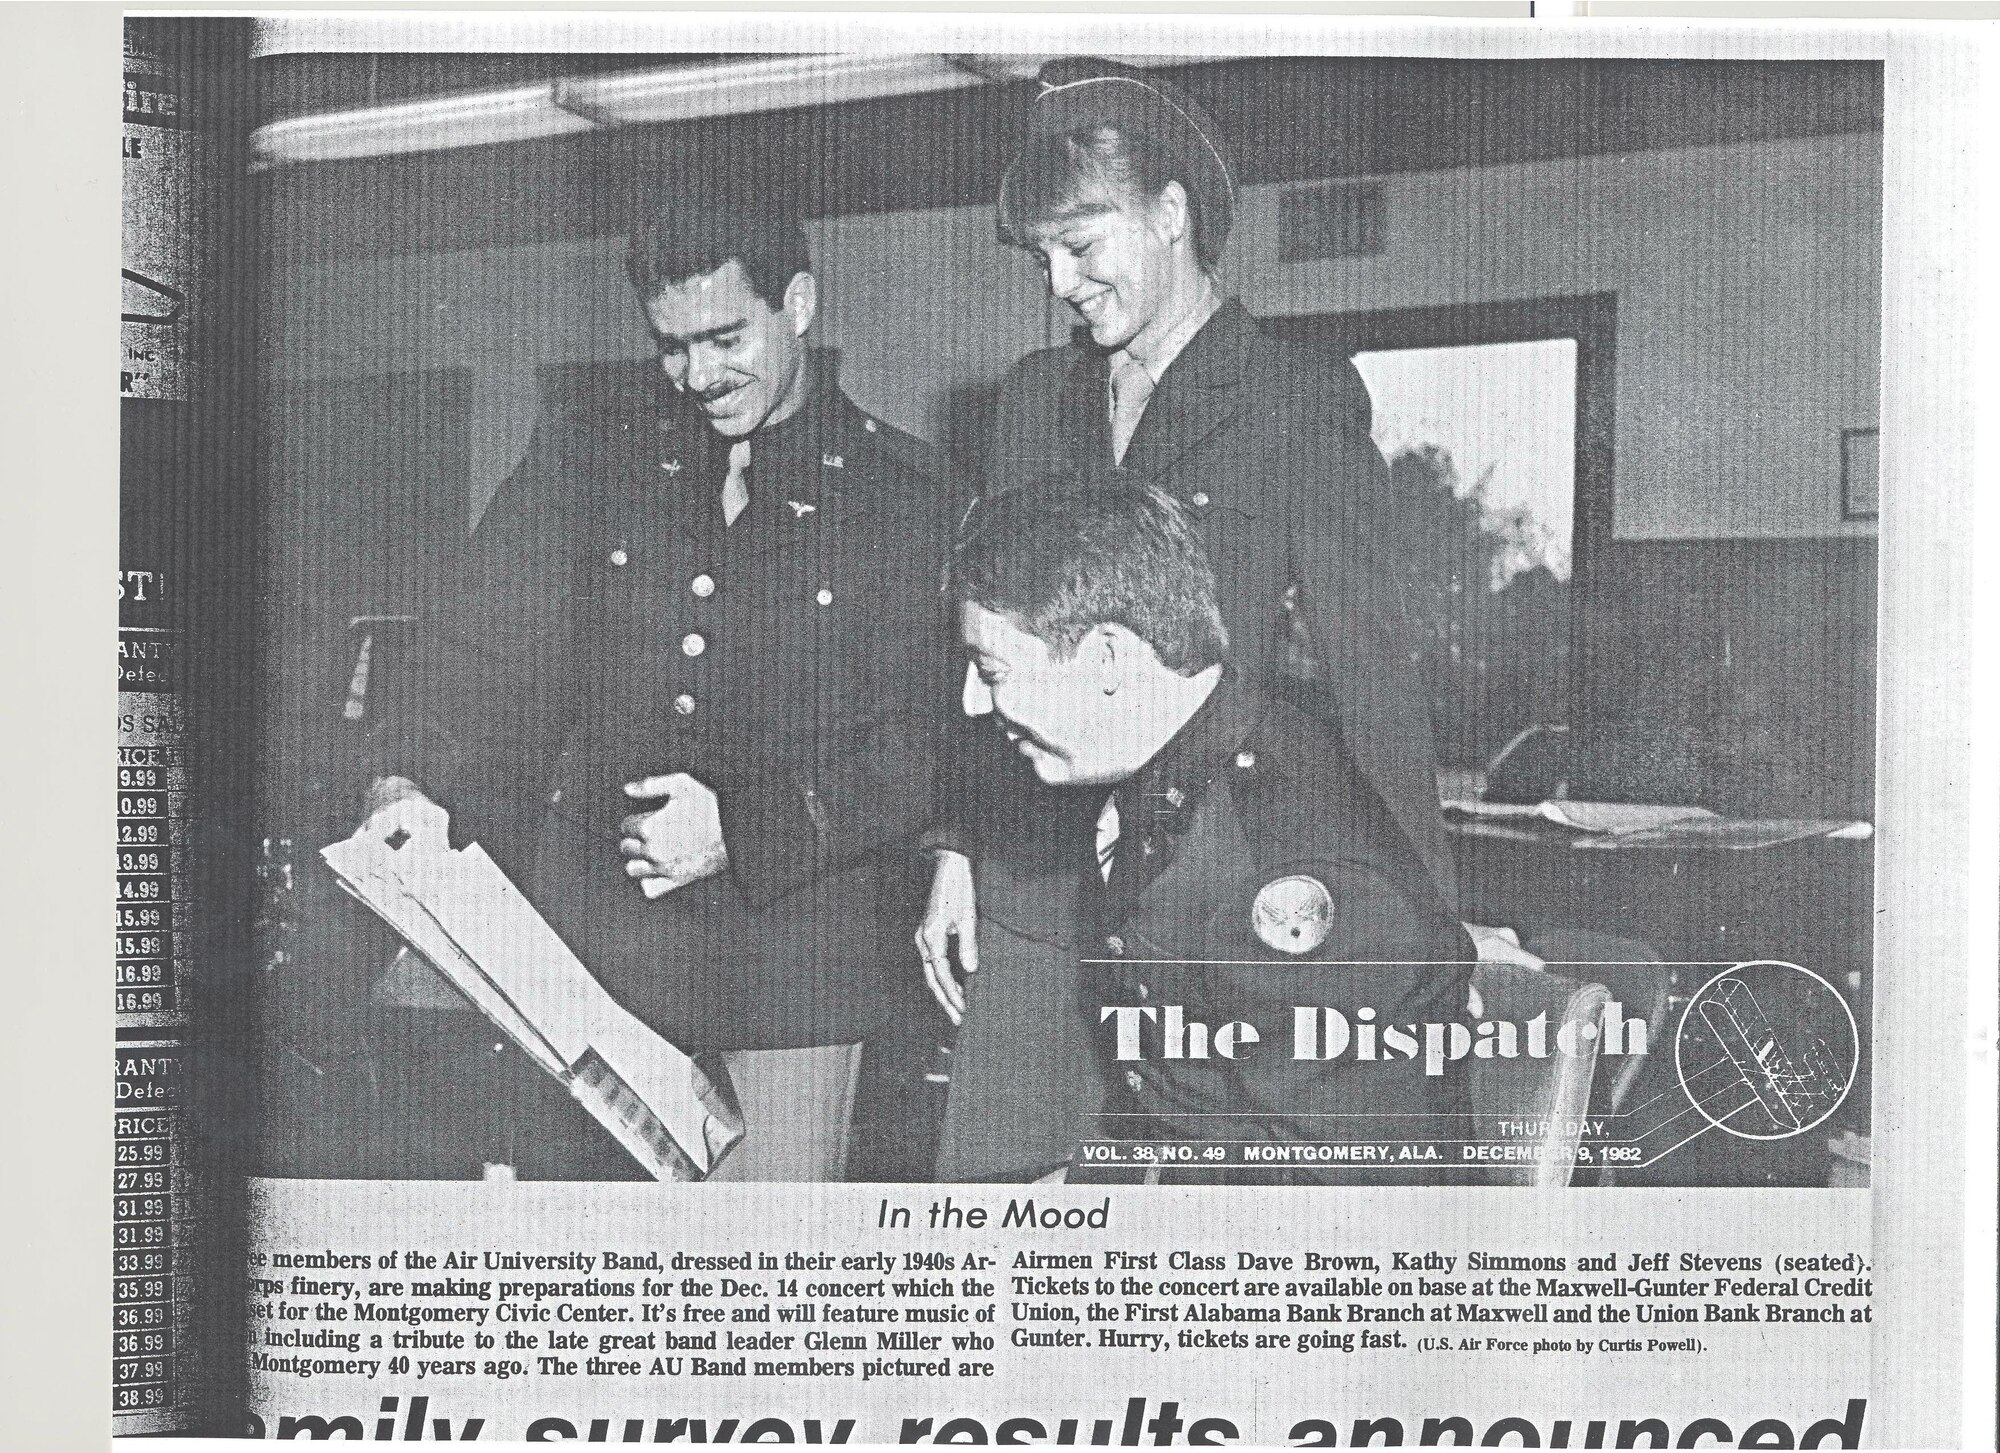 Three members of the AU Band, dressed in World War II uniforms, making preparations for the concert.  Dispatch, Dec 2, 1982, p. 21.